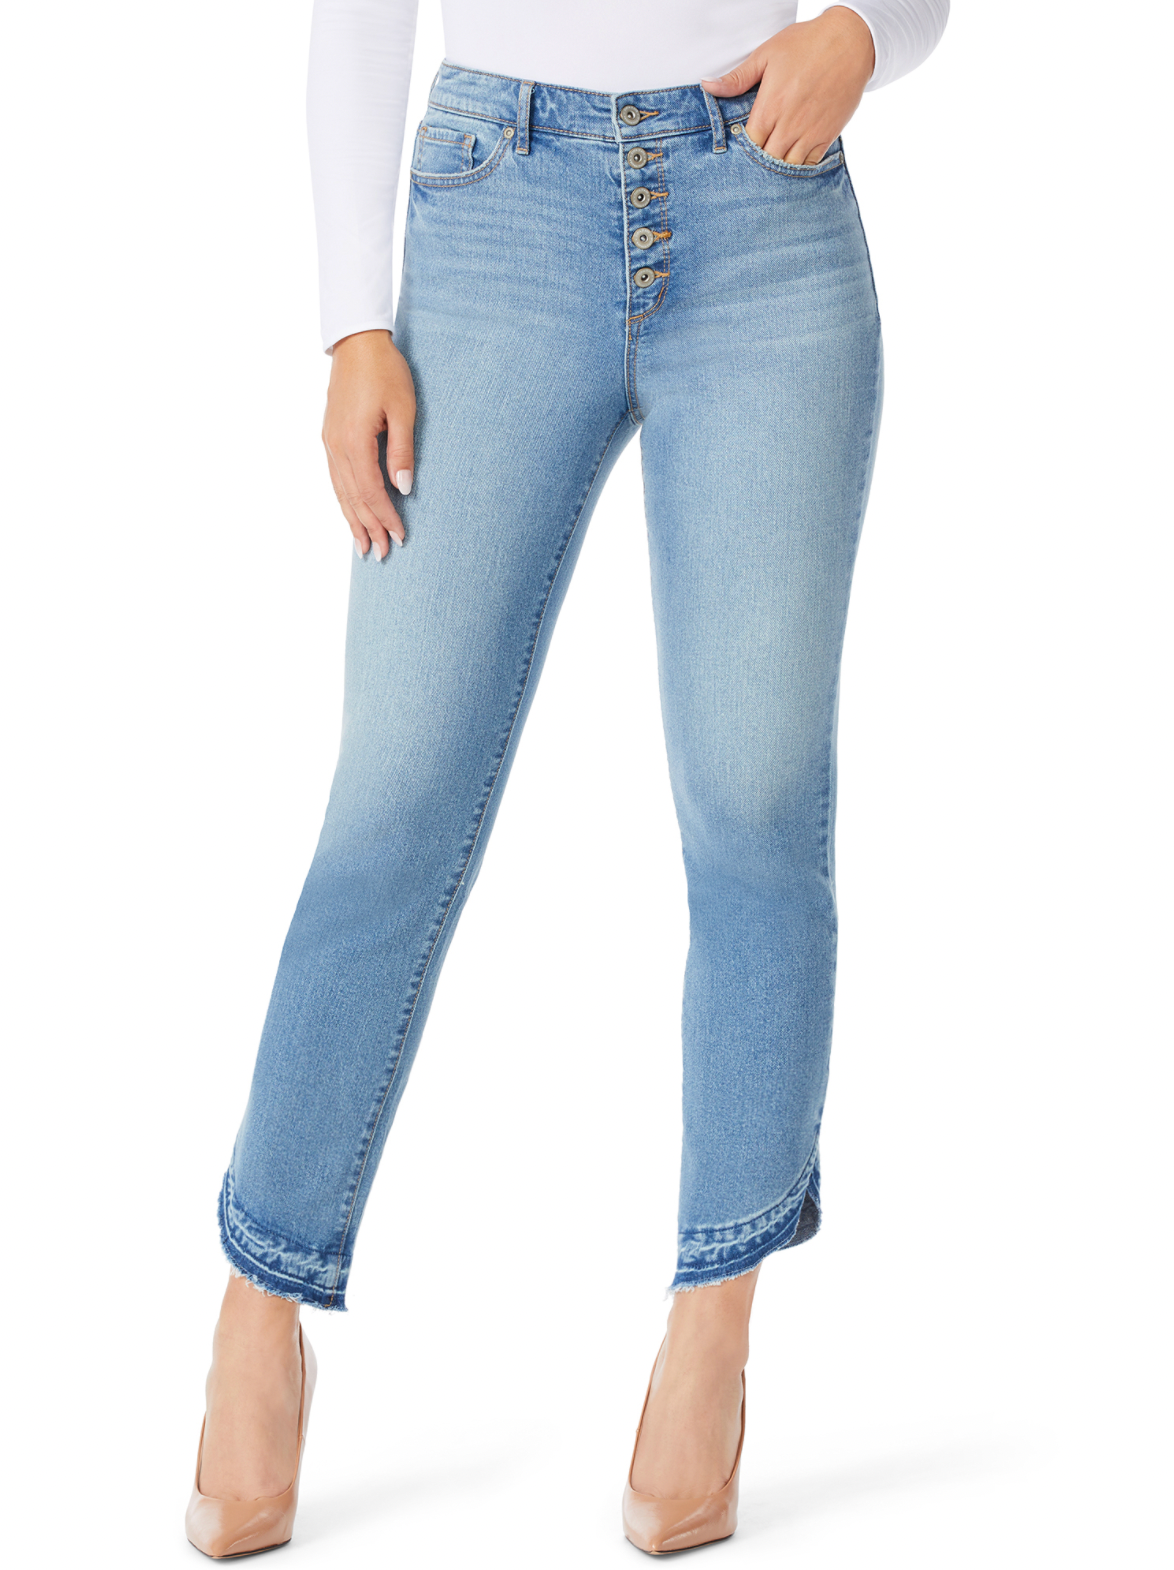 Fashion Look Featuring Sofia Jeans By Sofia Vergara Flare Jeans and H&M One  Piece Swimsuits by margaretchase - ShopStyle